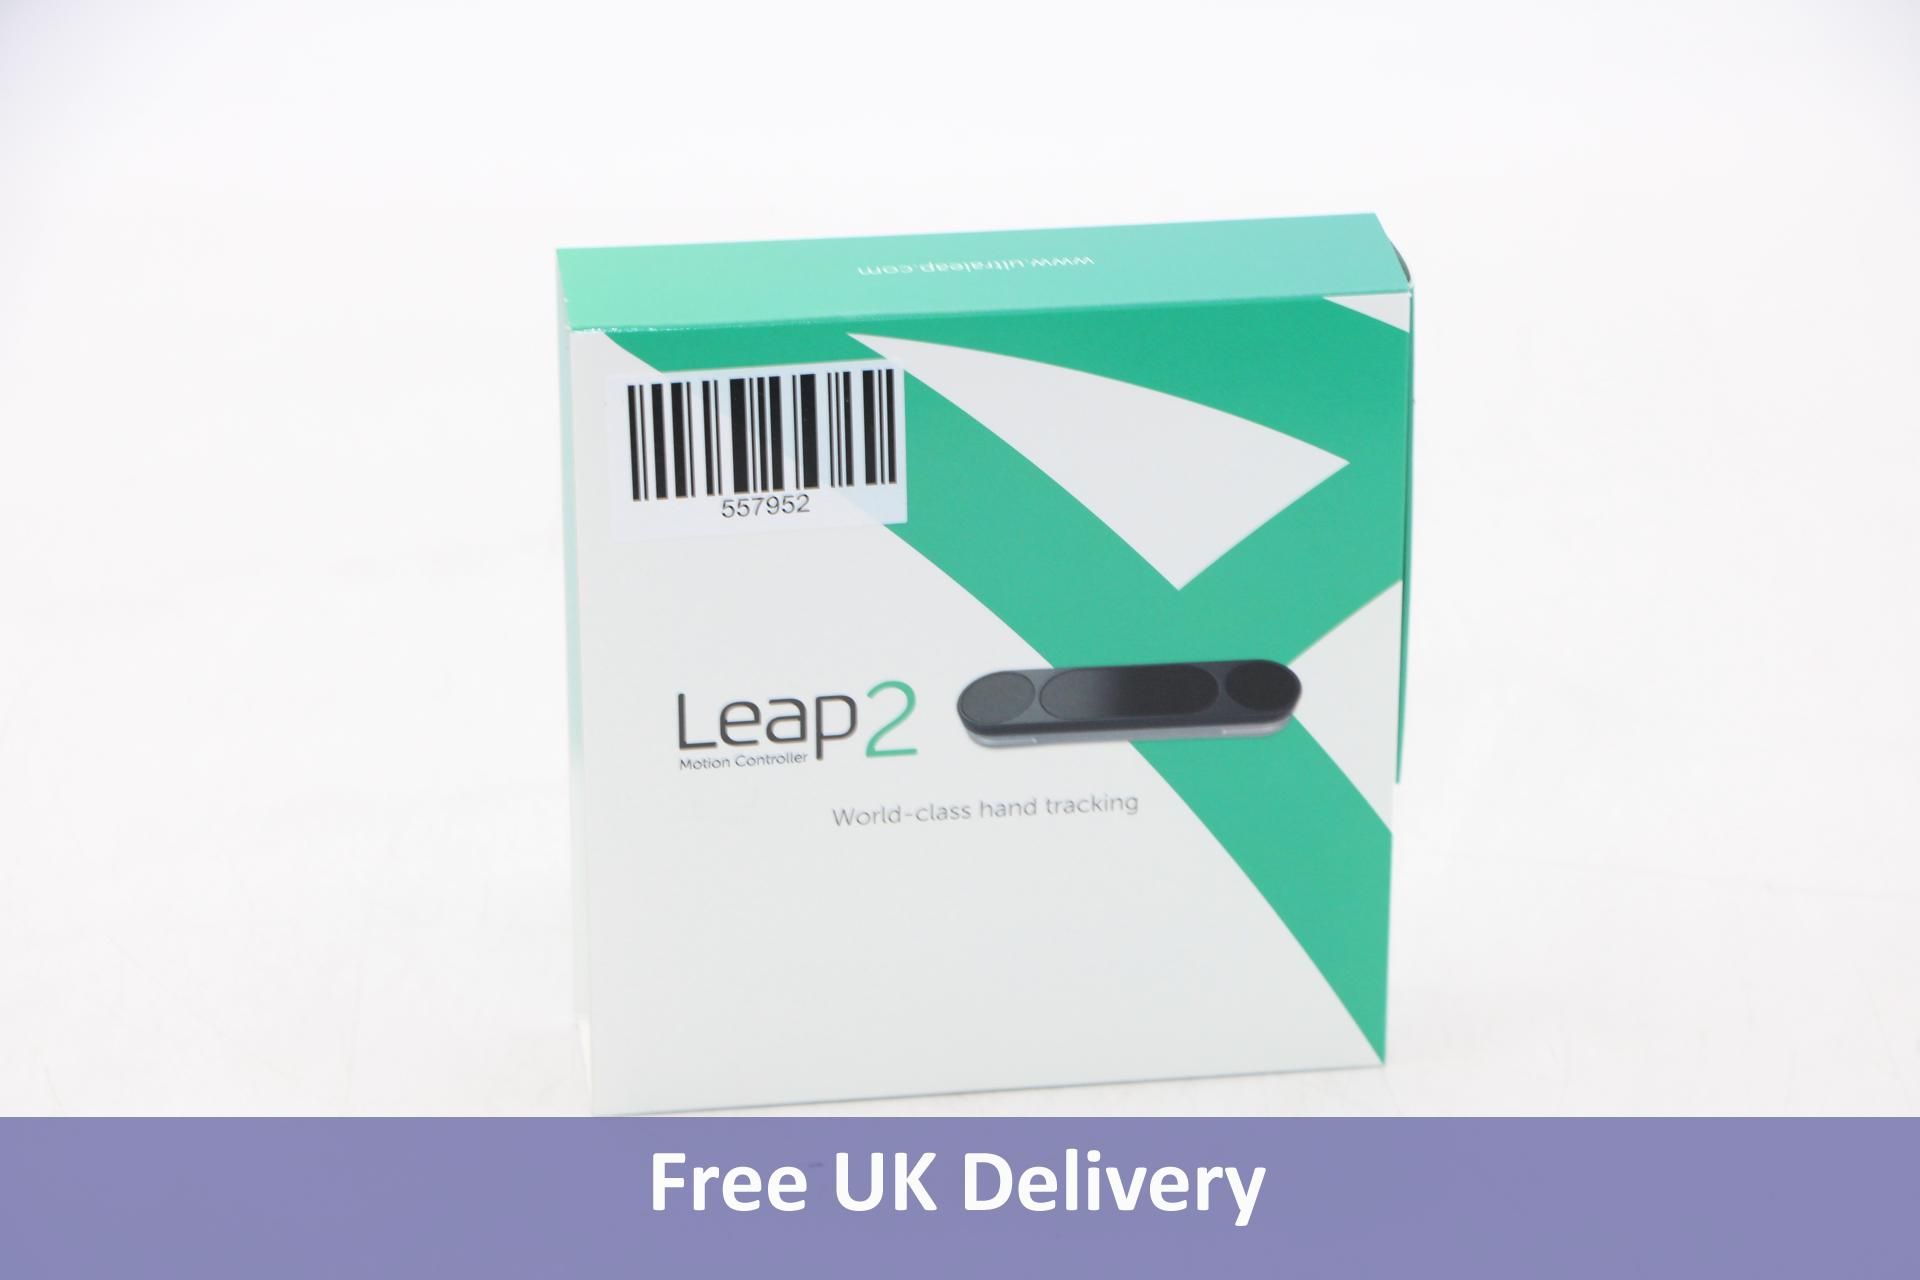 Five Ultraleap Leap Motion Controller 2. New, sealed. Total RRP £715 - Image 2 of 5